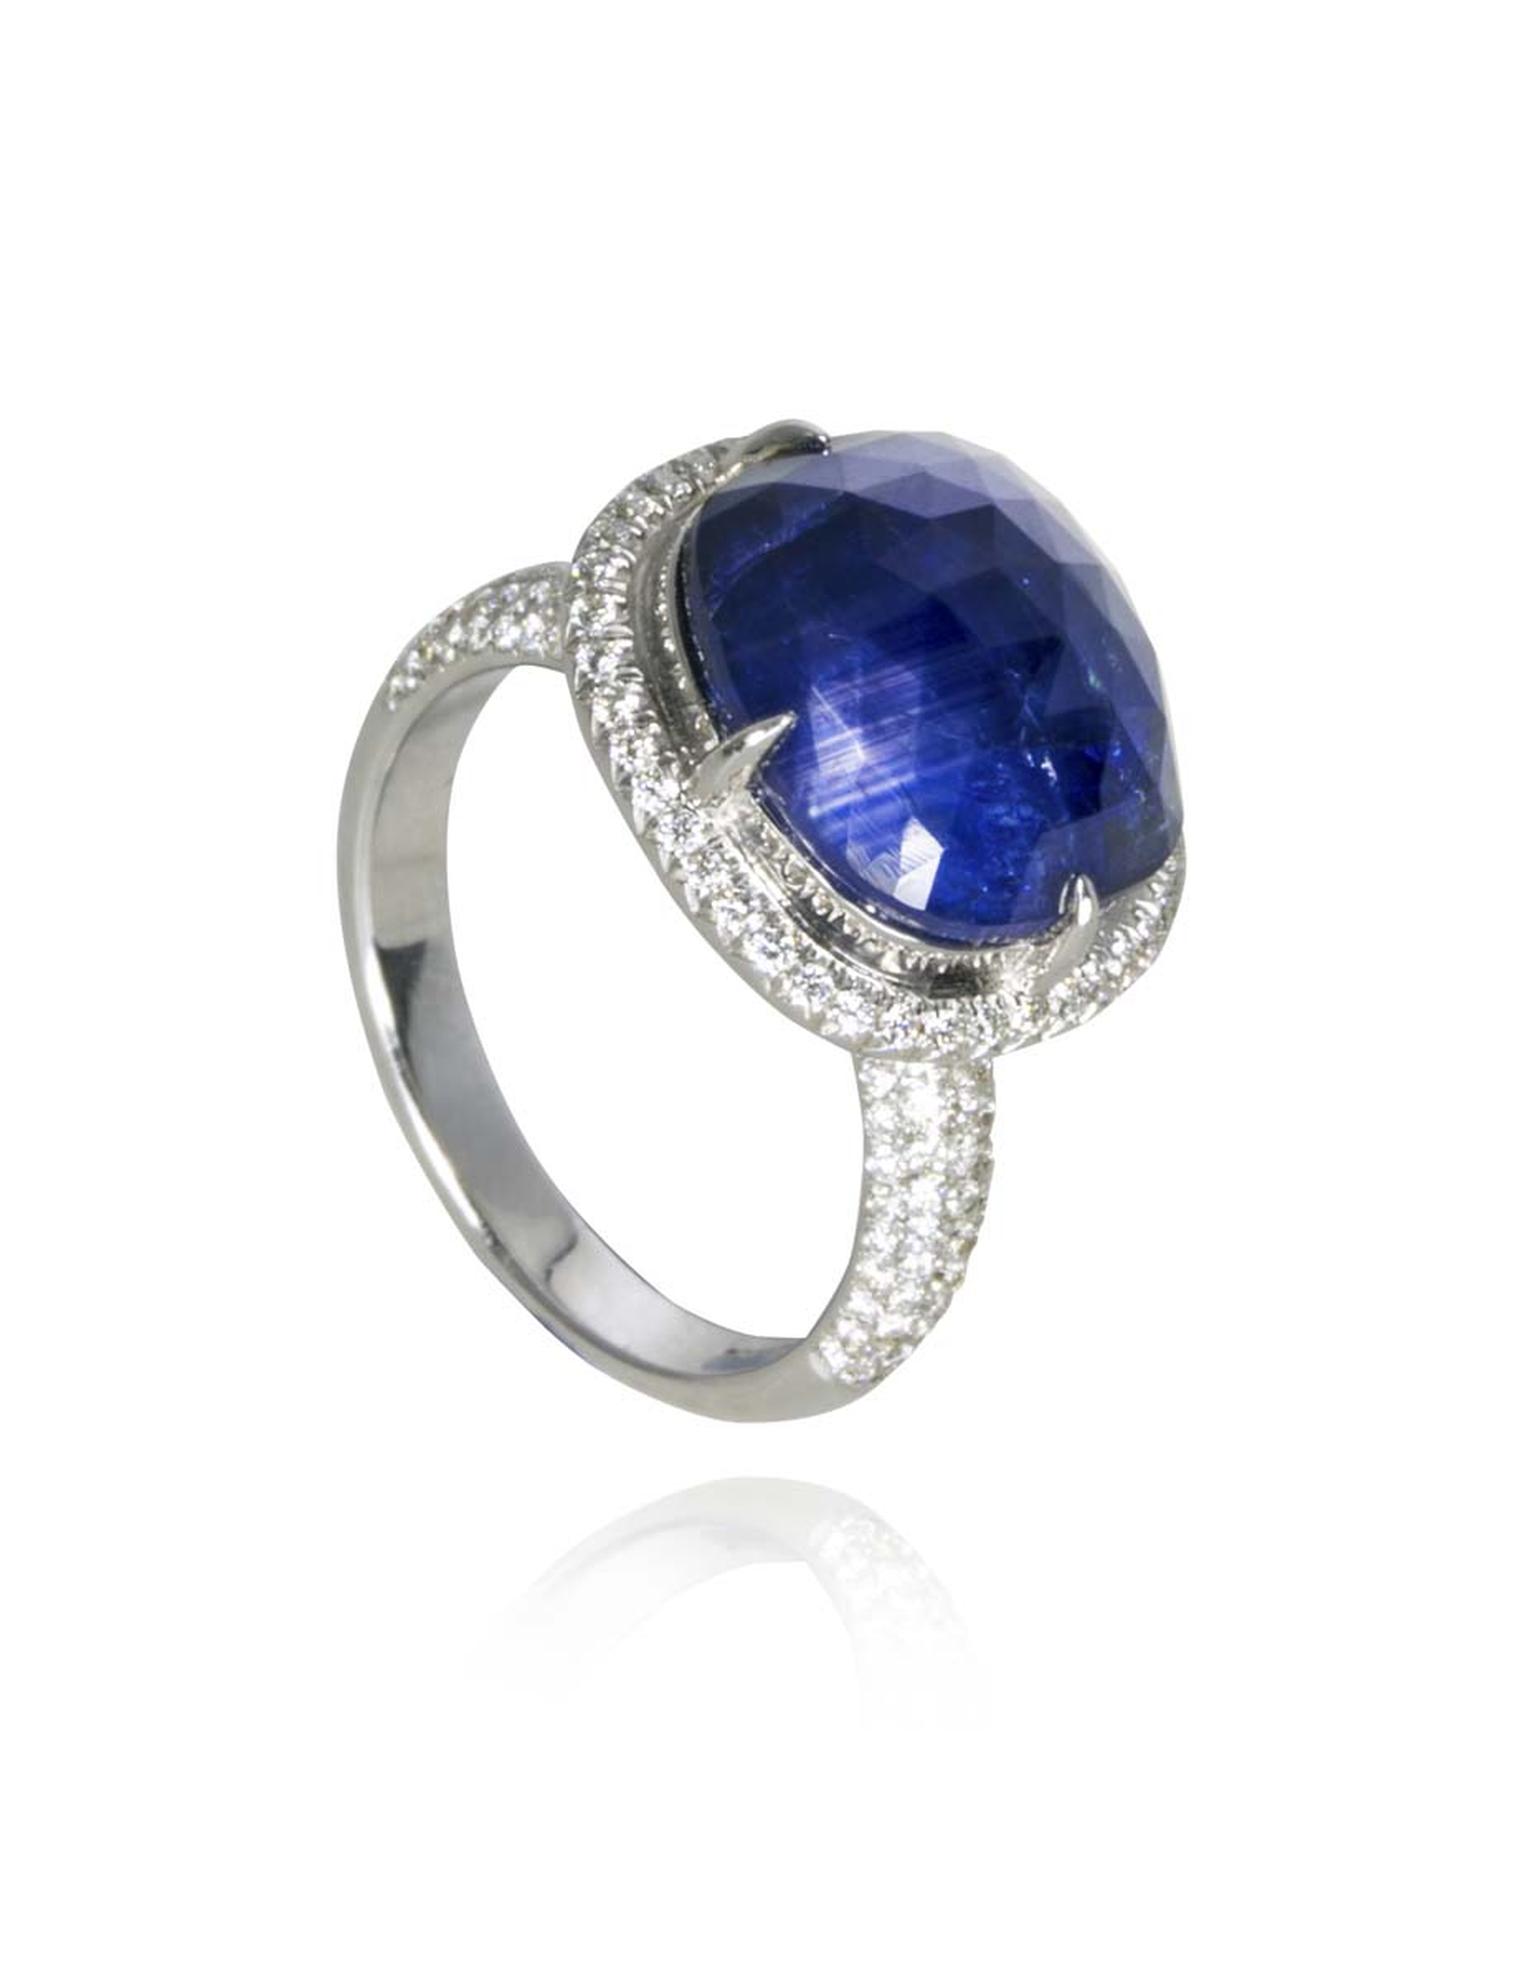 The blue sapphire in this Amrapali engagement ring packs a colourful punch in a setting that emphasises the stone’s bulbous shape and its rich indigo hue.